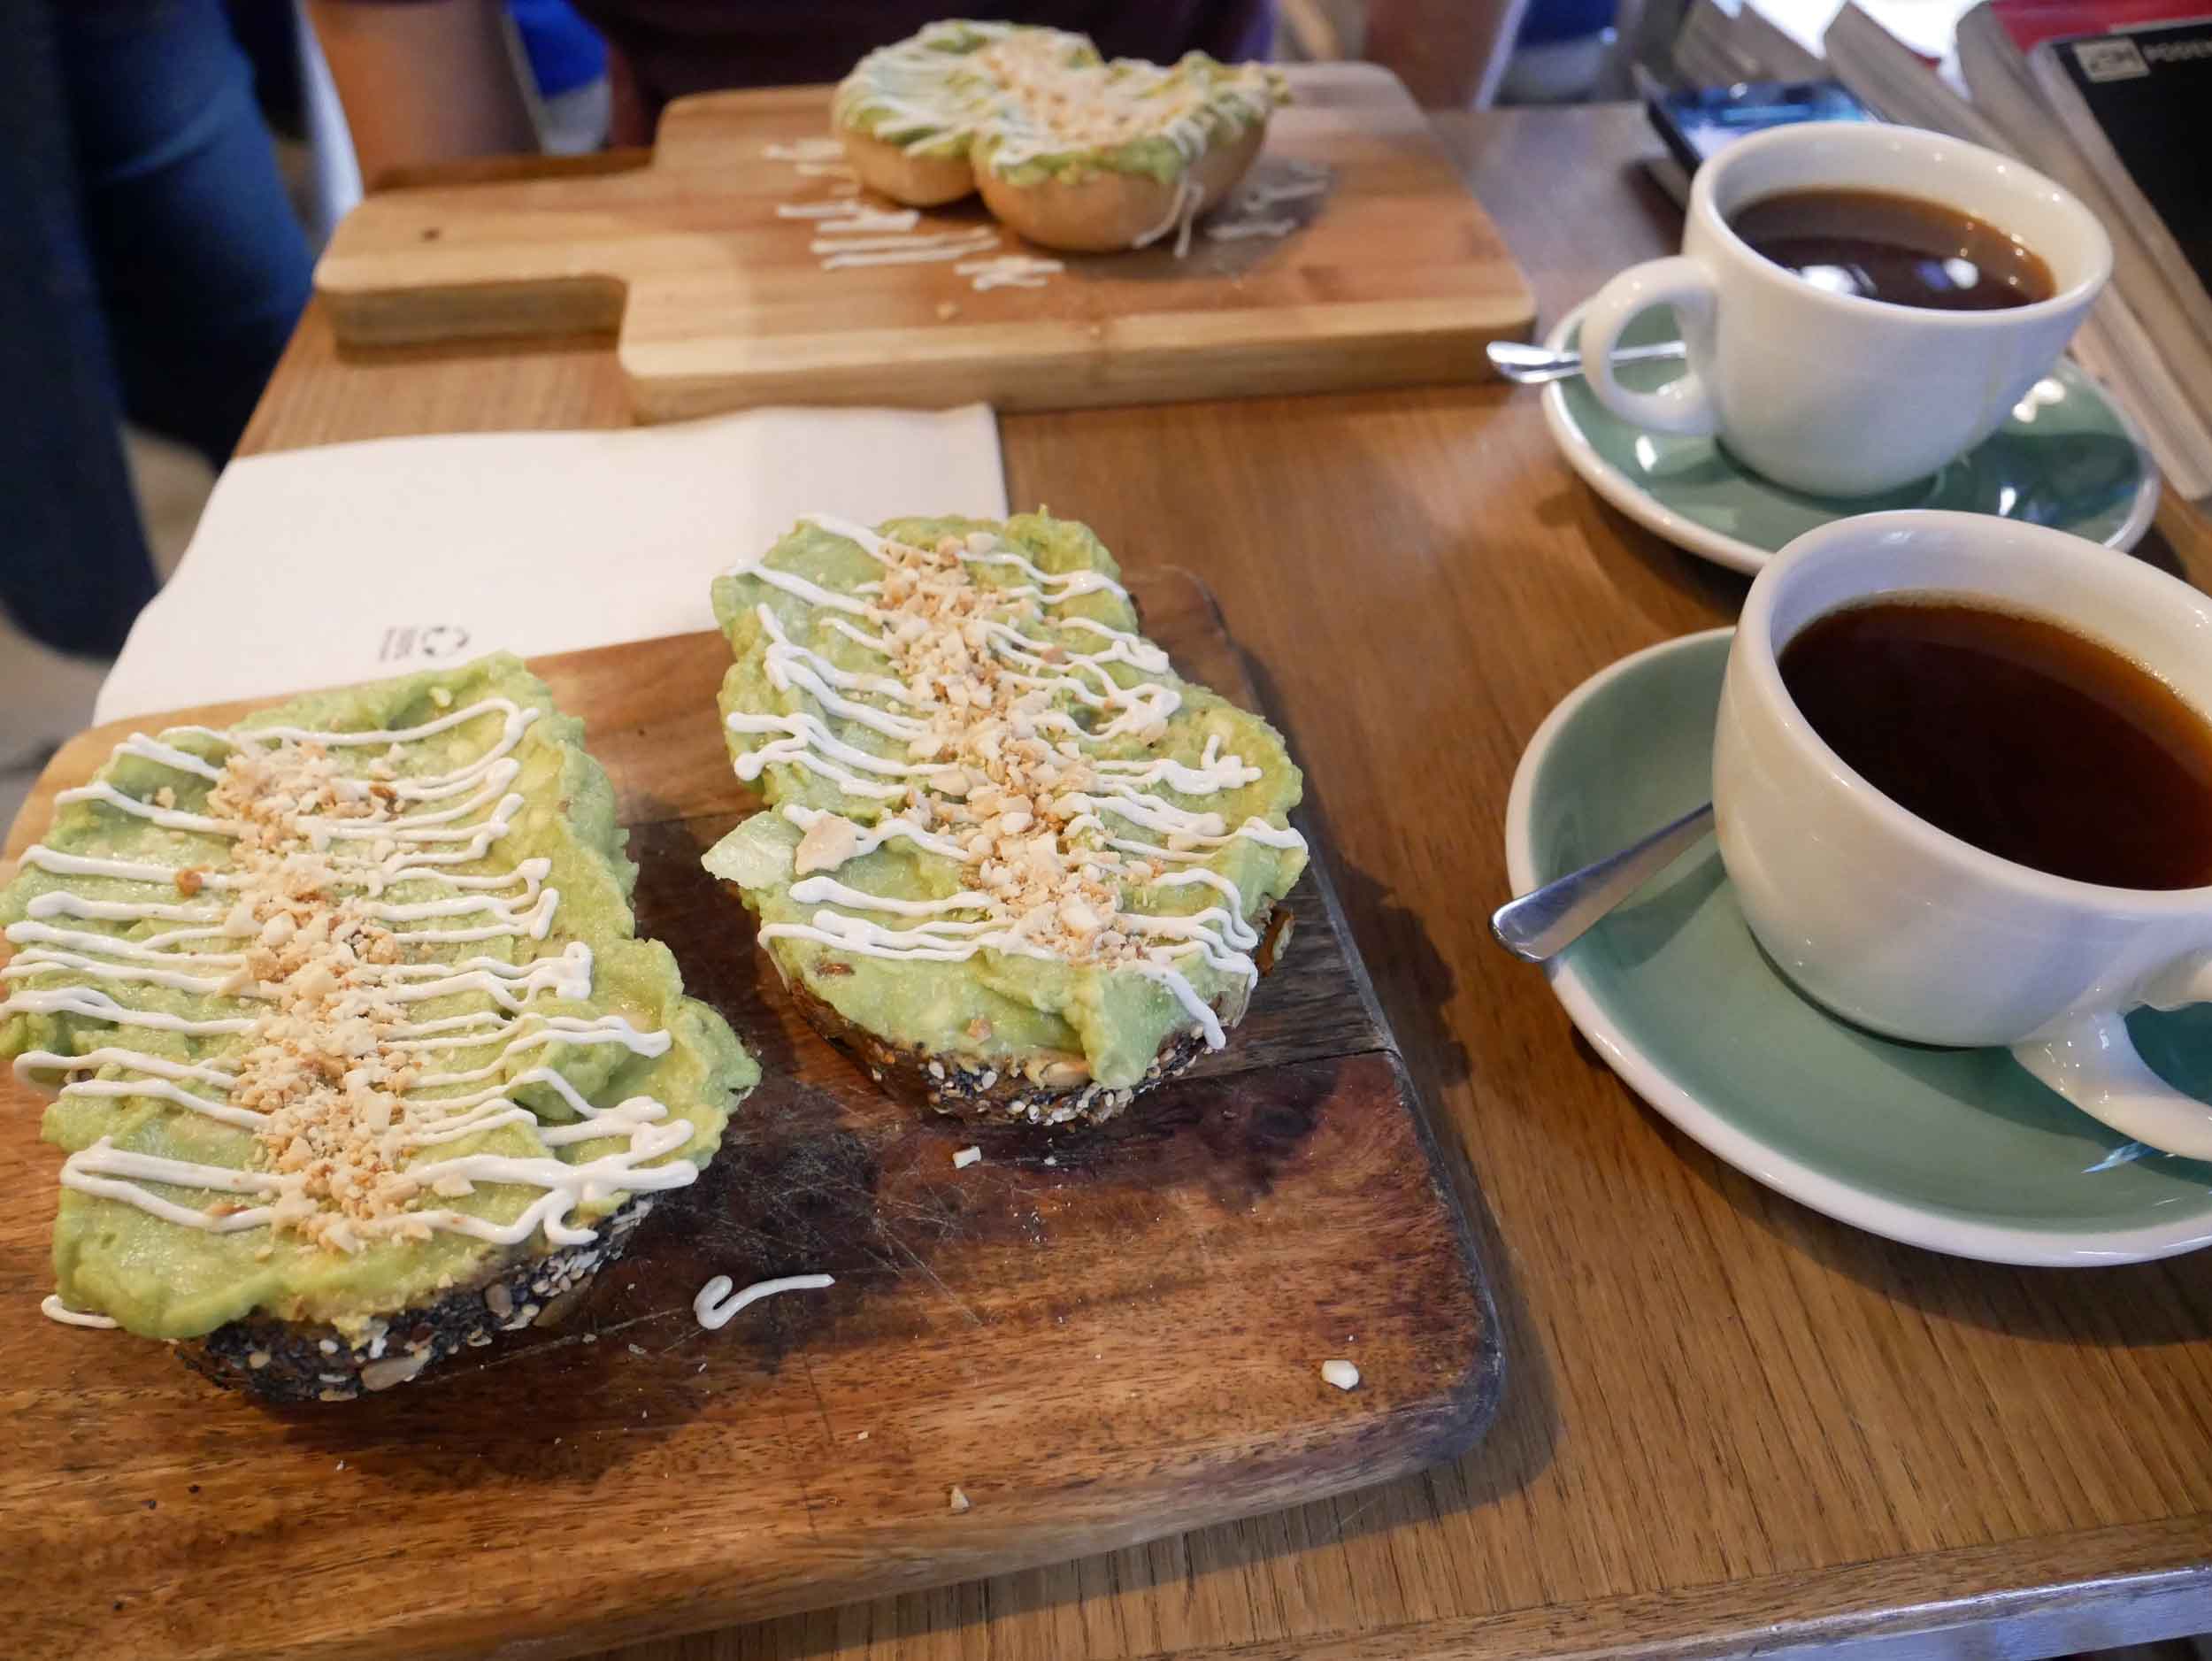  Our last breakfast in Europe of the year of avocado toast at Pum Pum (Sept 25). 